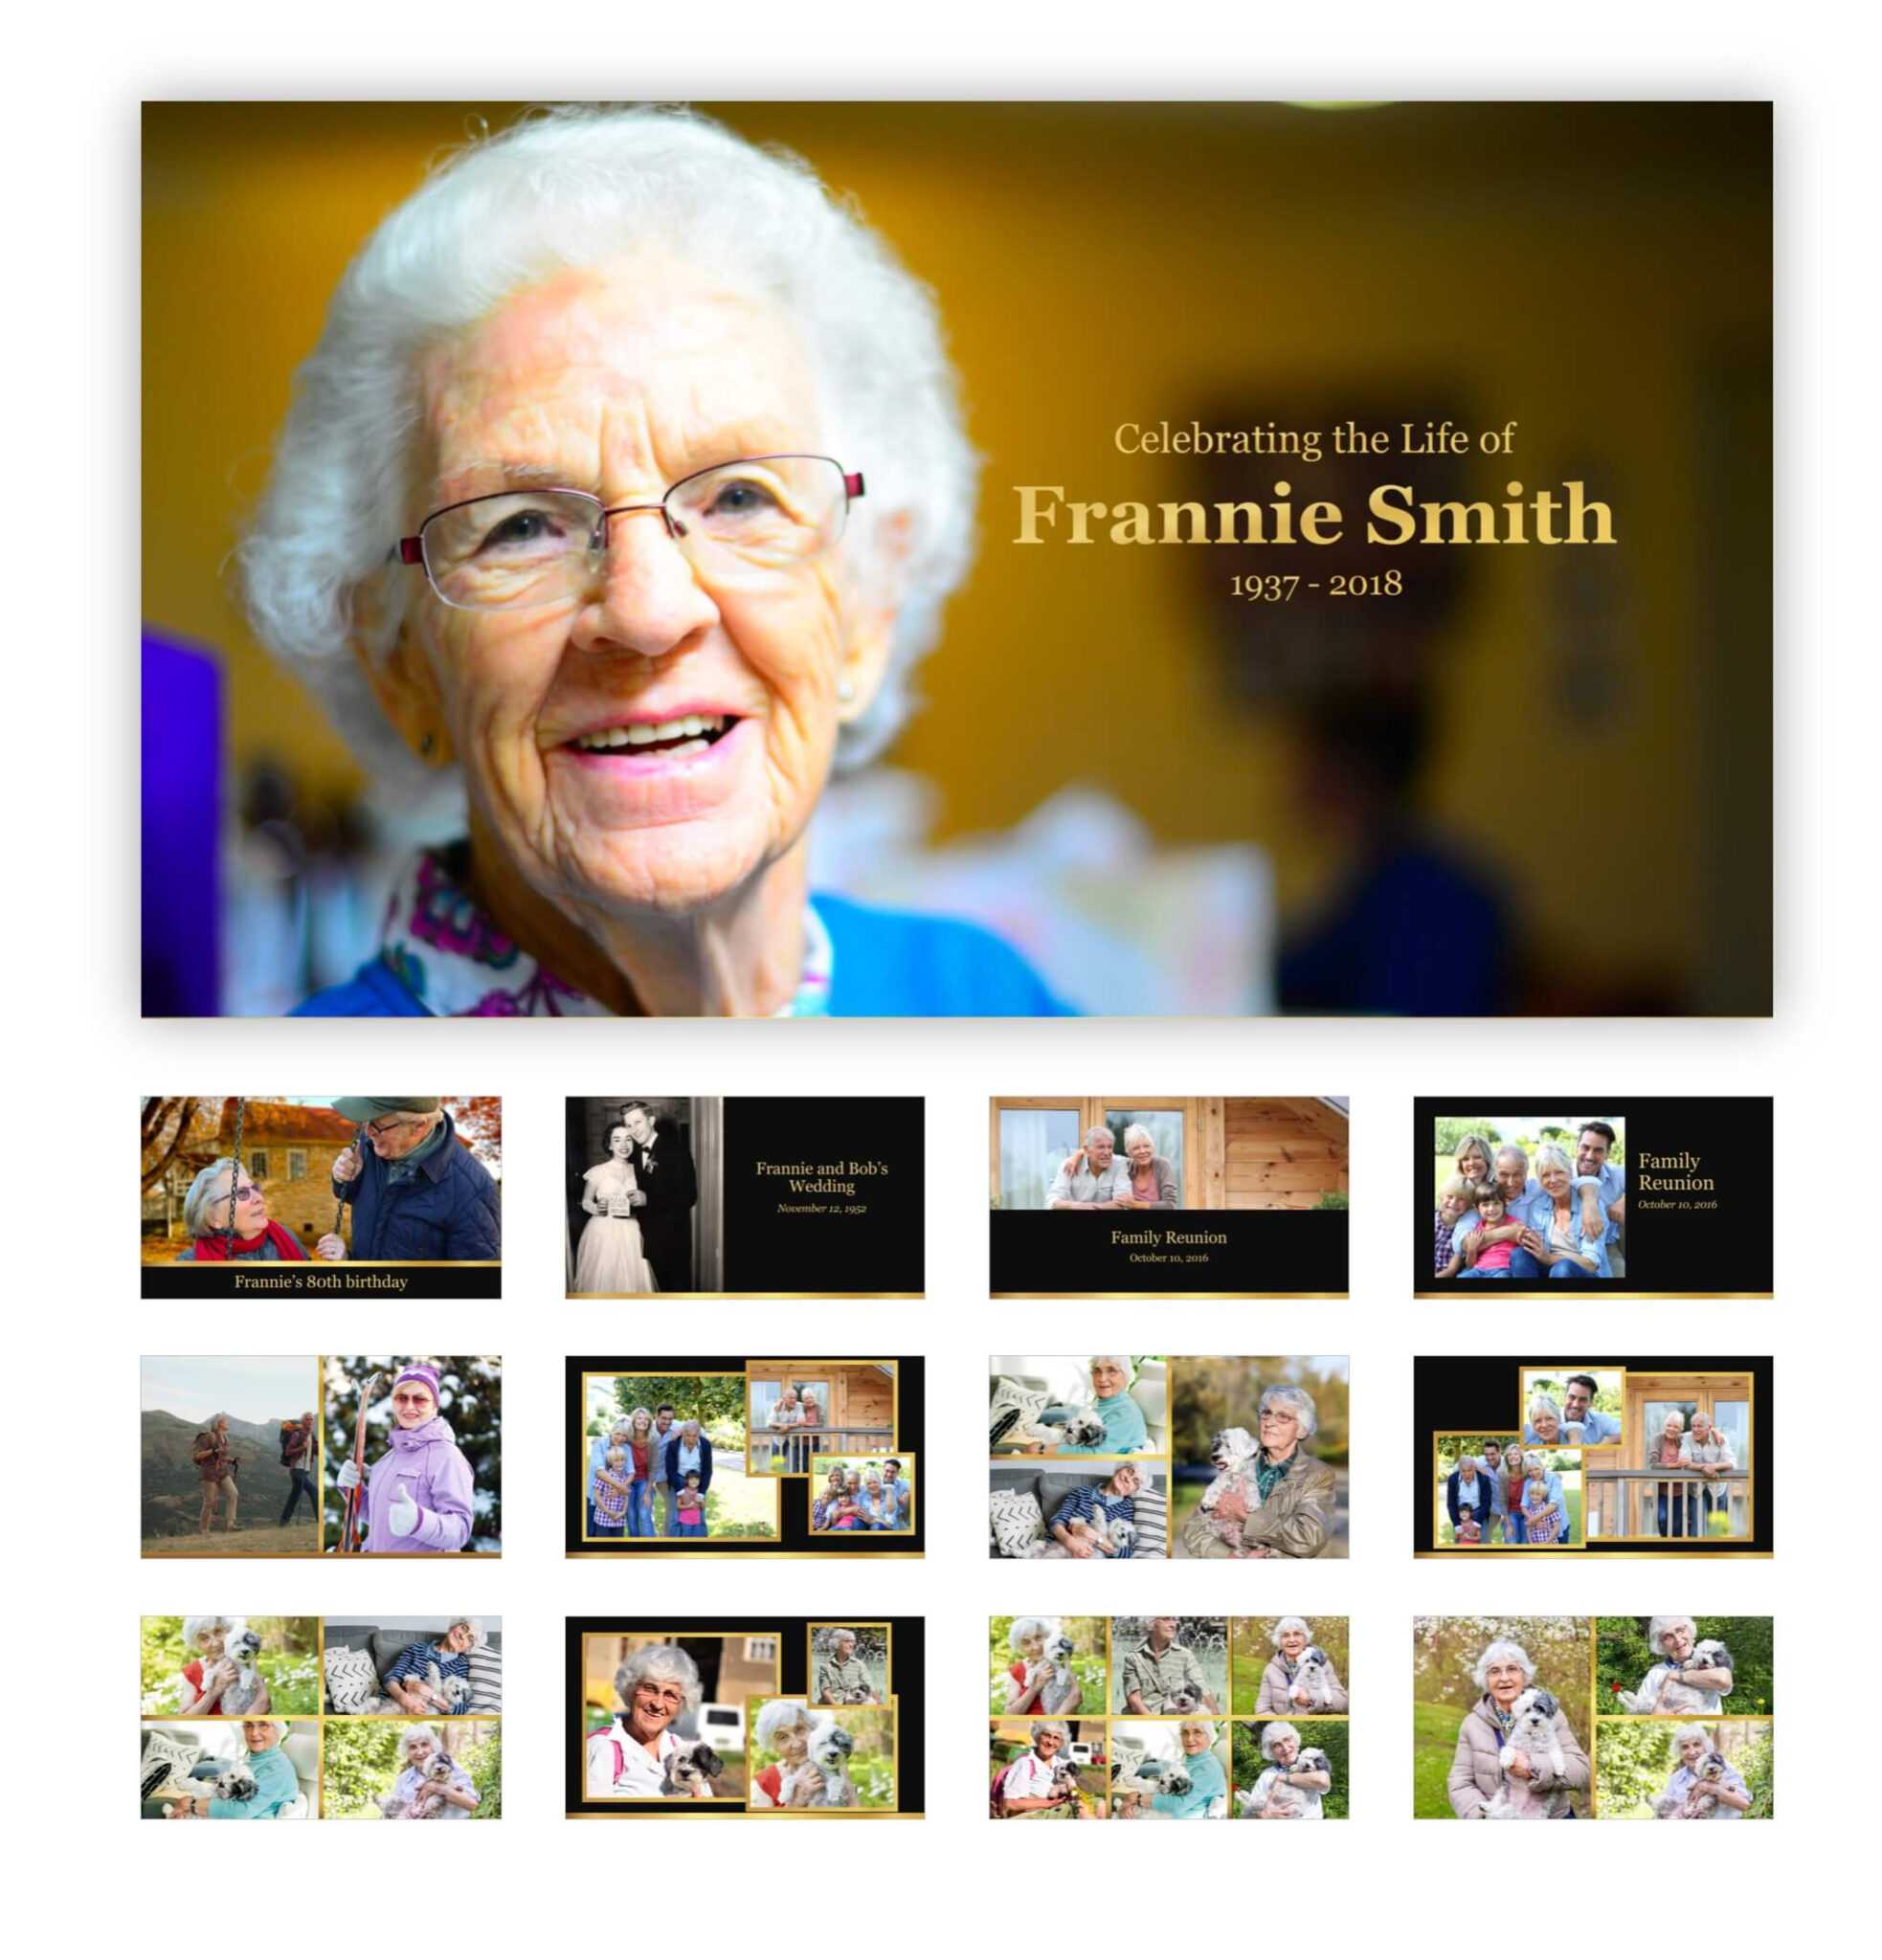 Best Funeral Powerpoint Templates Of 2019 | Adrienne Johnston With ...